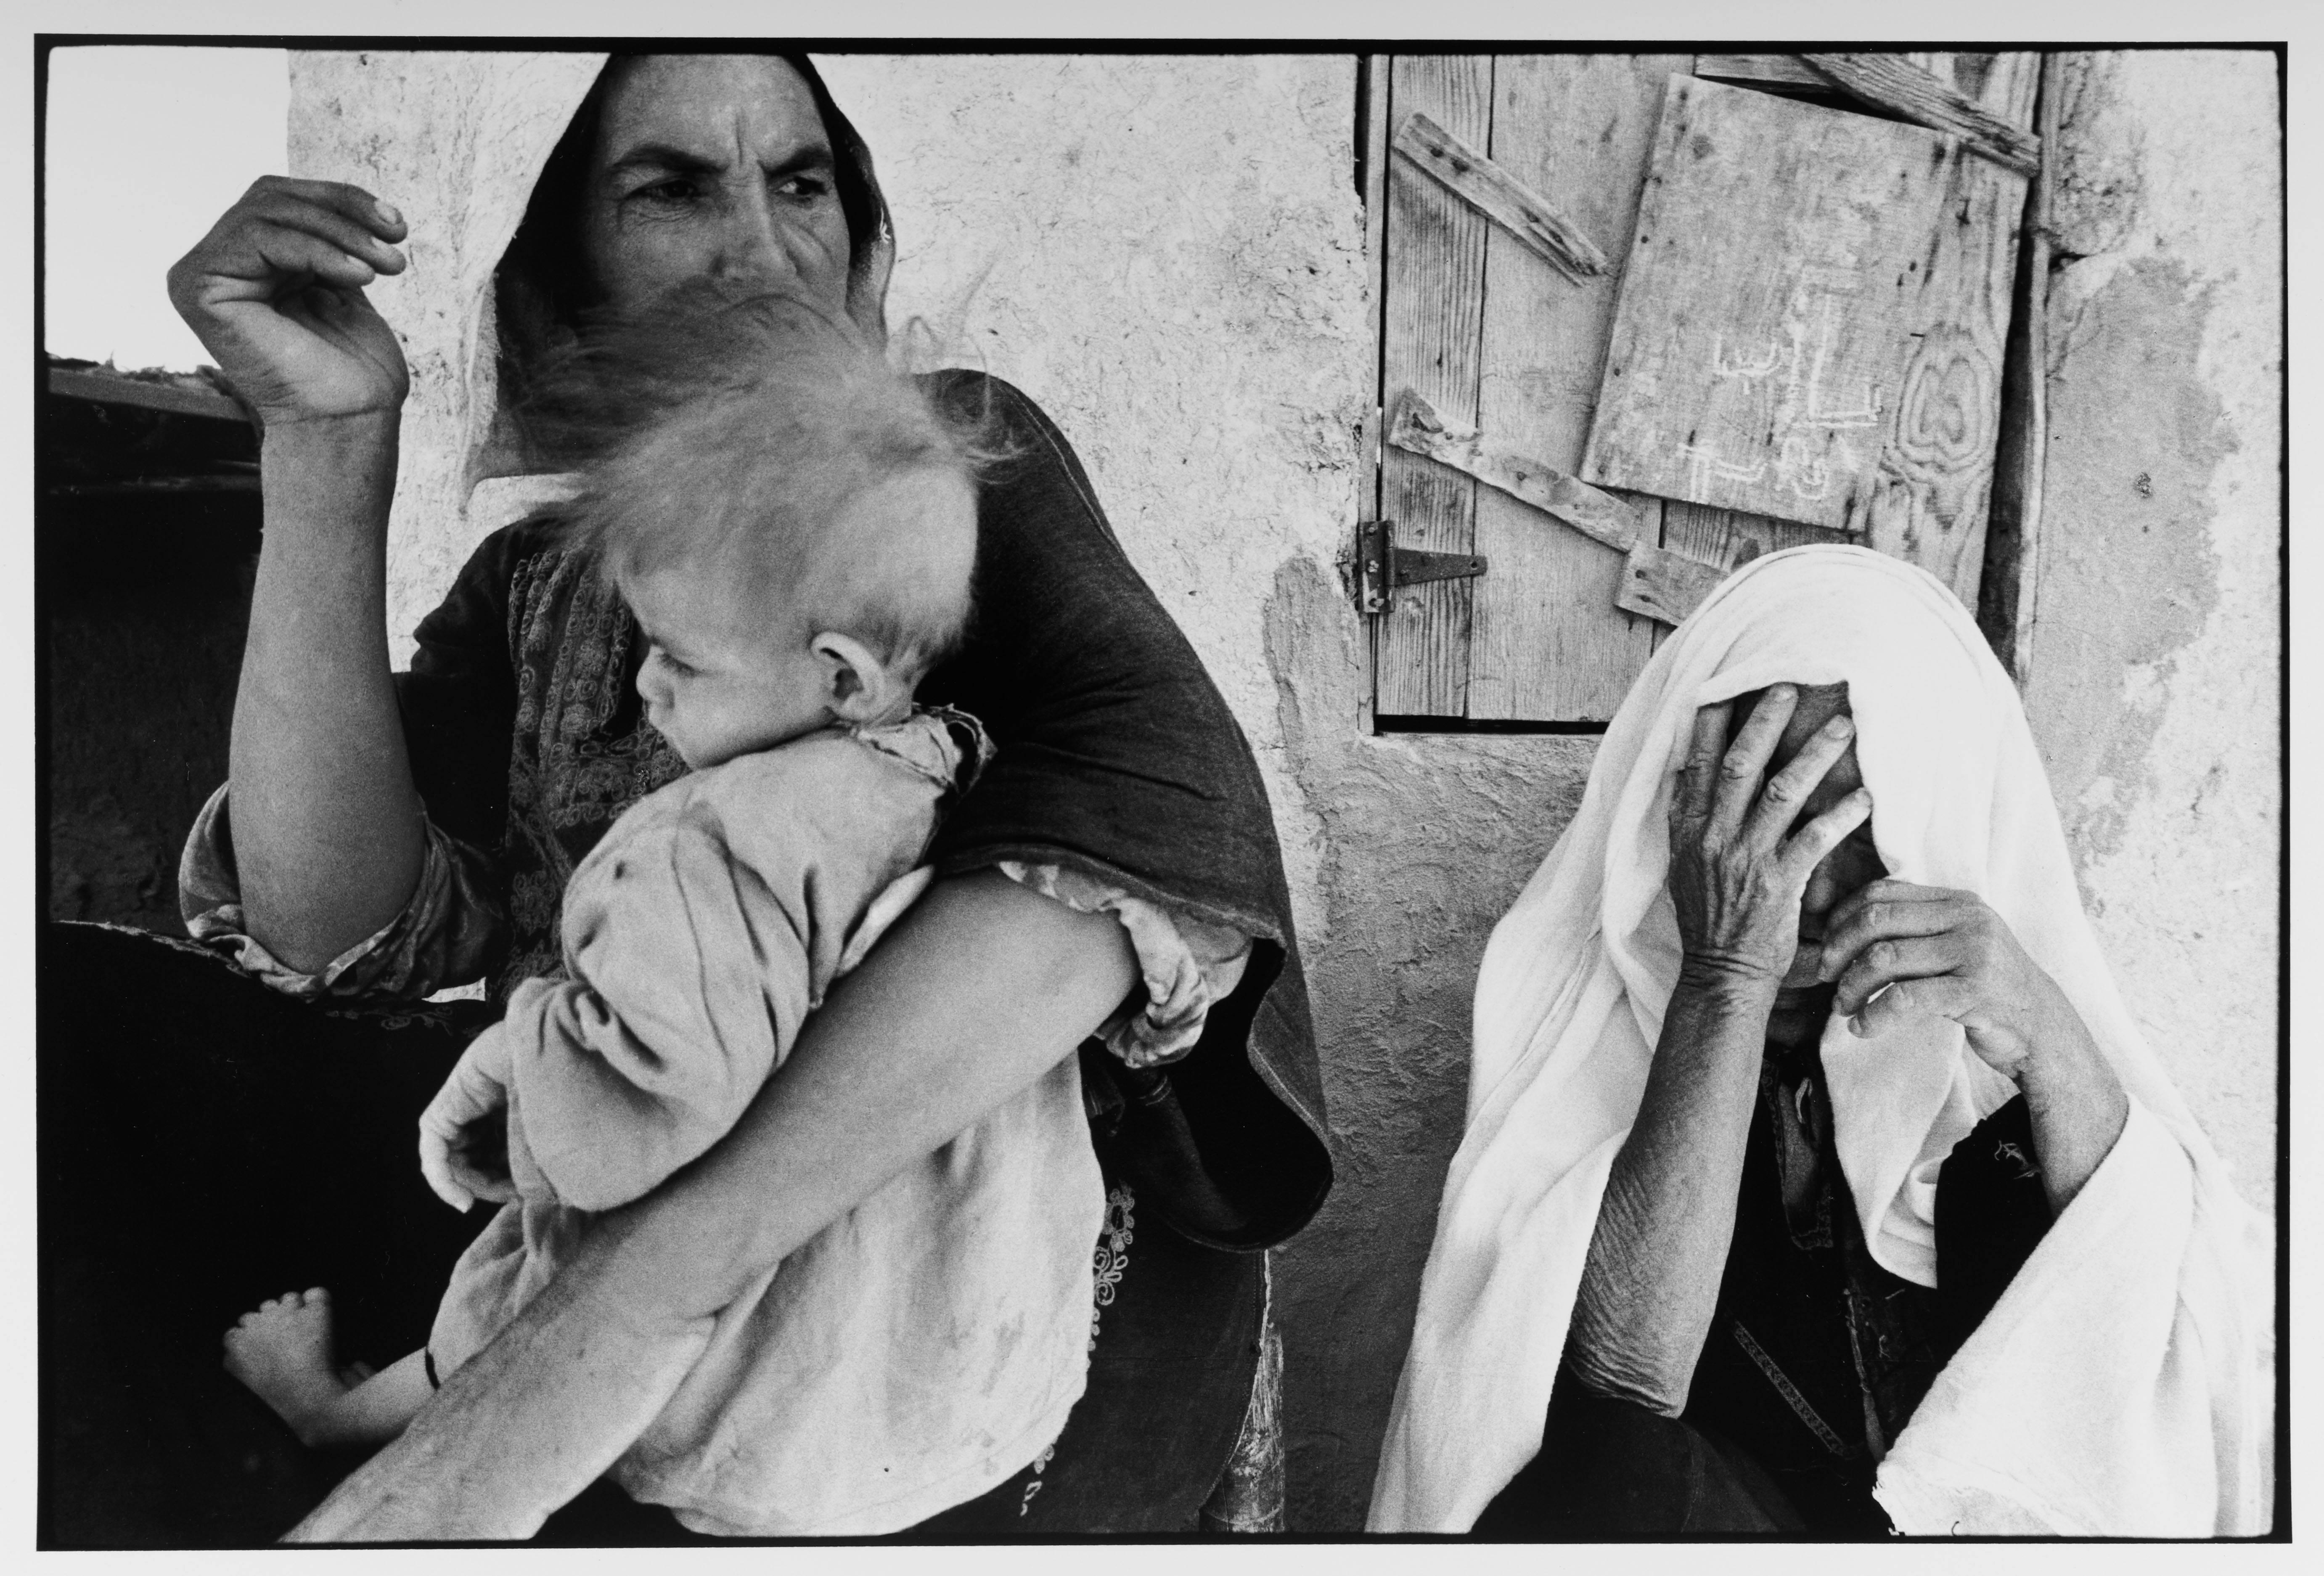 Leonard Freed Black and White Photograph – Israelische Refugees